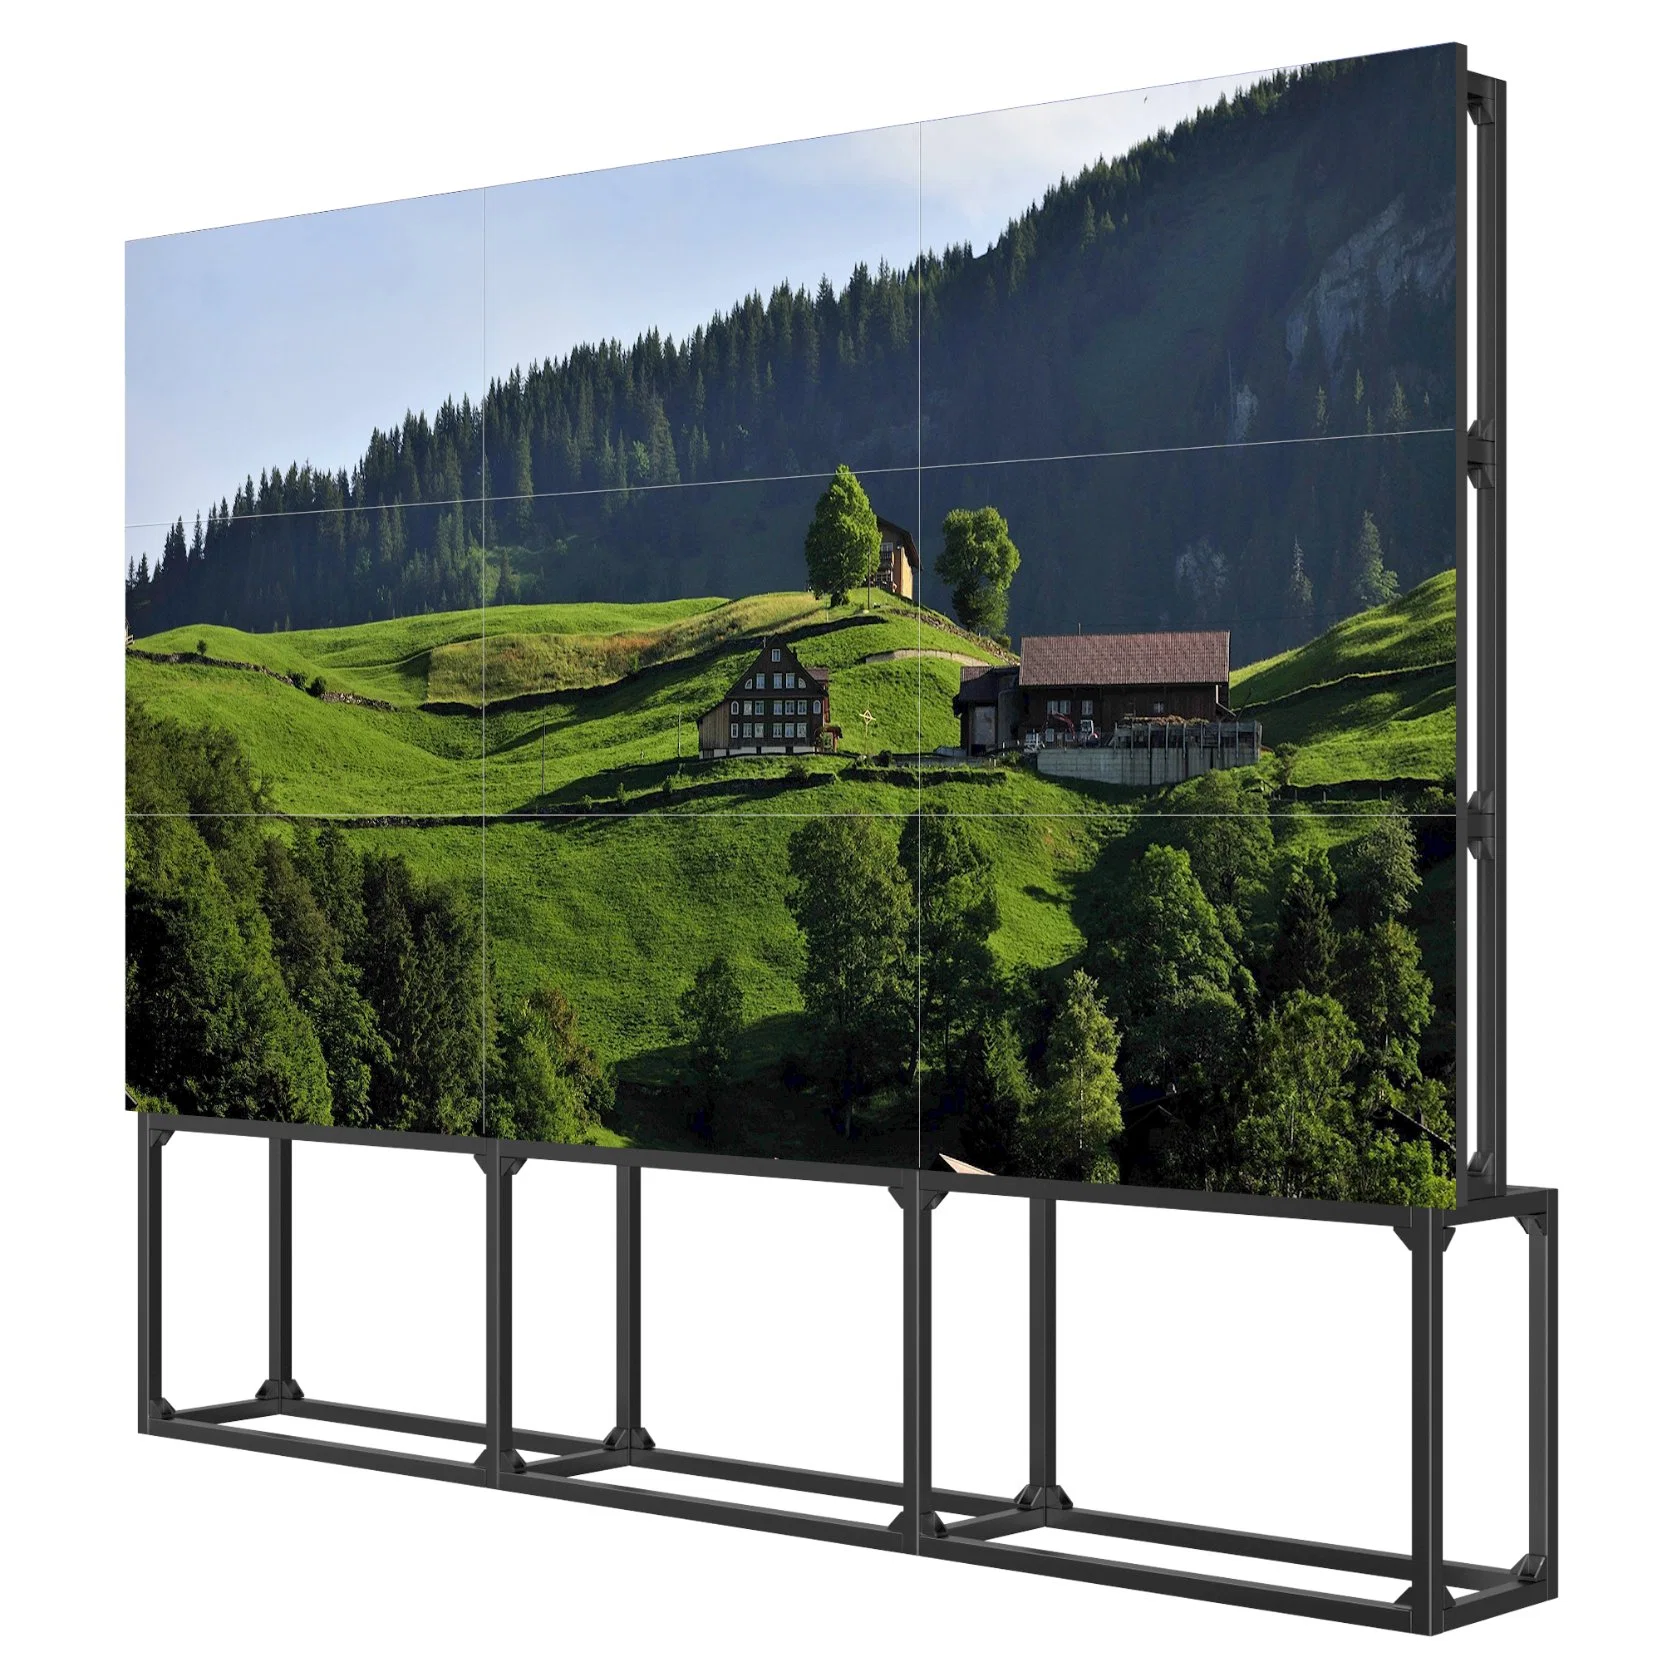 3X3 Imported Original 46inch LCD Video Wall with Controller Wall Mount Rack 4K Video Wall LED TV